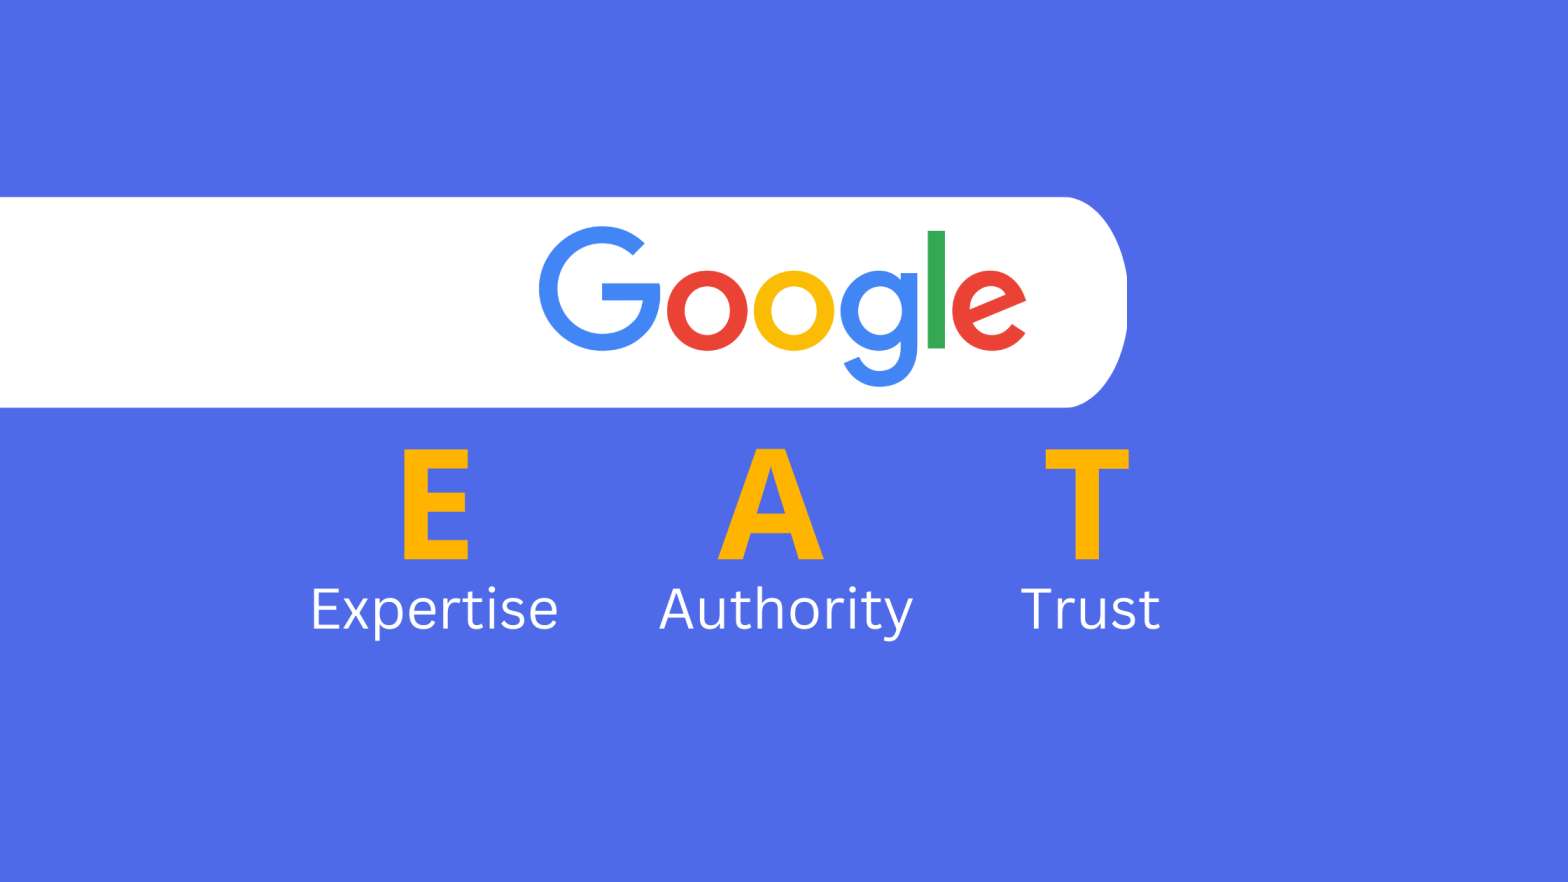 Google doubles up on E with updated search quality guidelines (E-E-A-T)